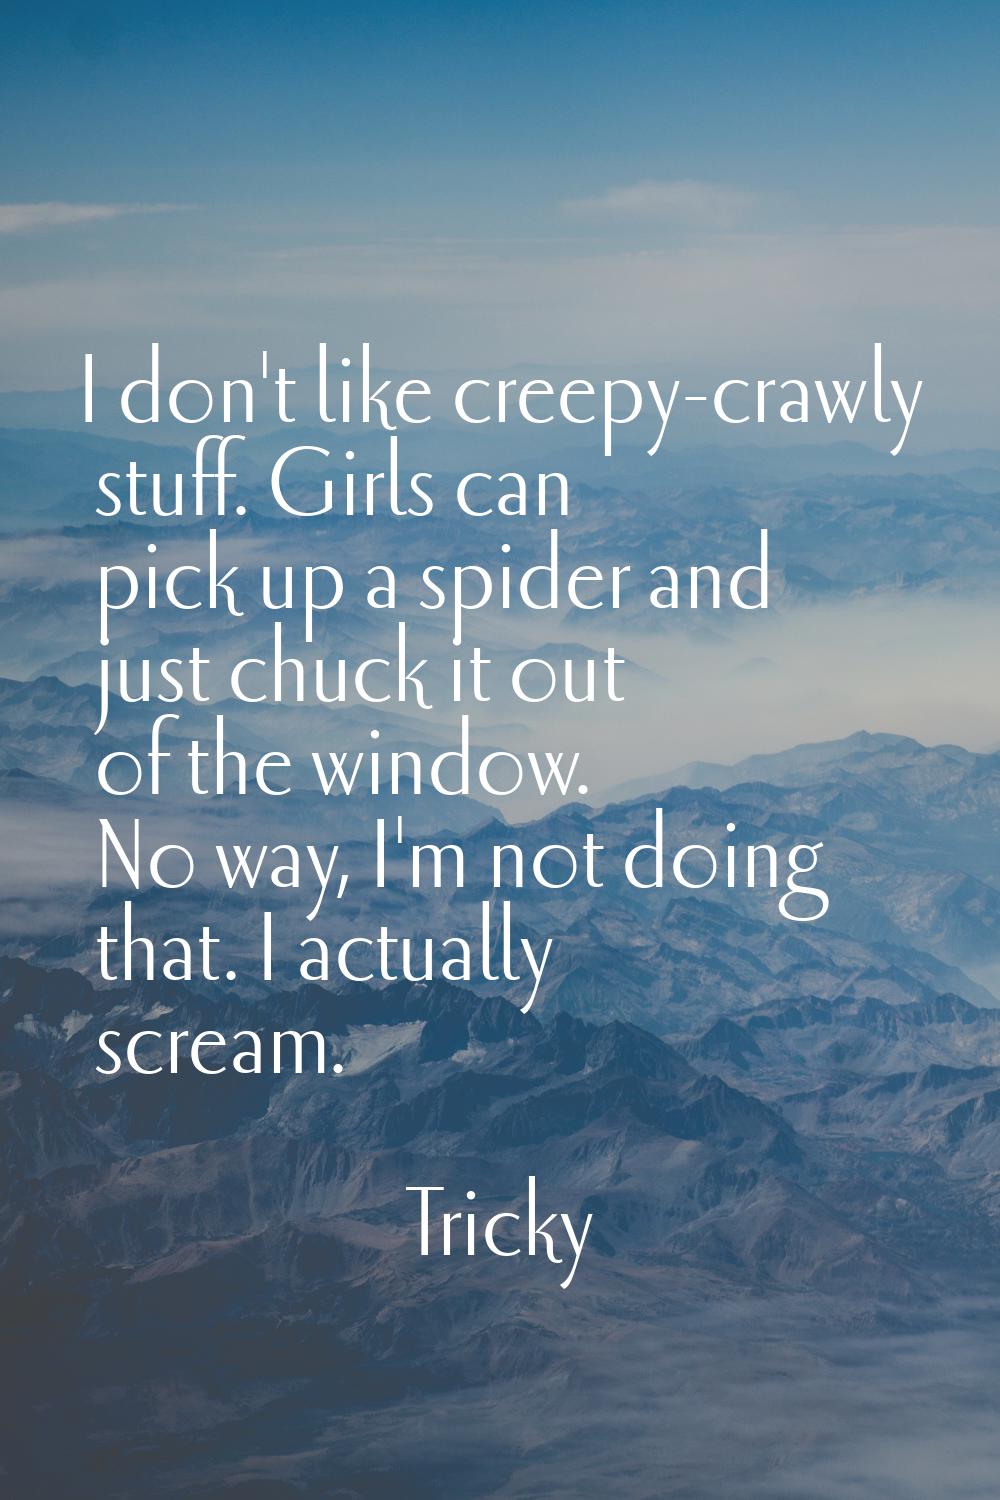 I don't like creepy-crawly stuff. Girls can pick up a spider and just chuck it out of the window. N